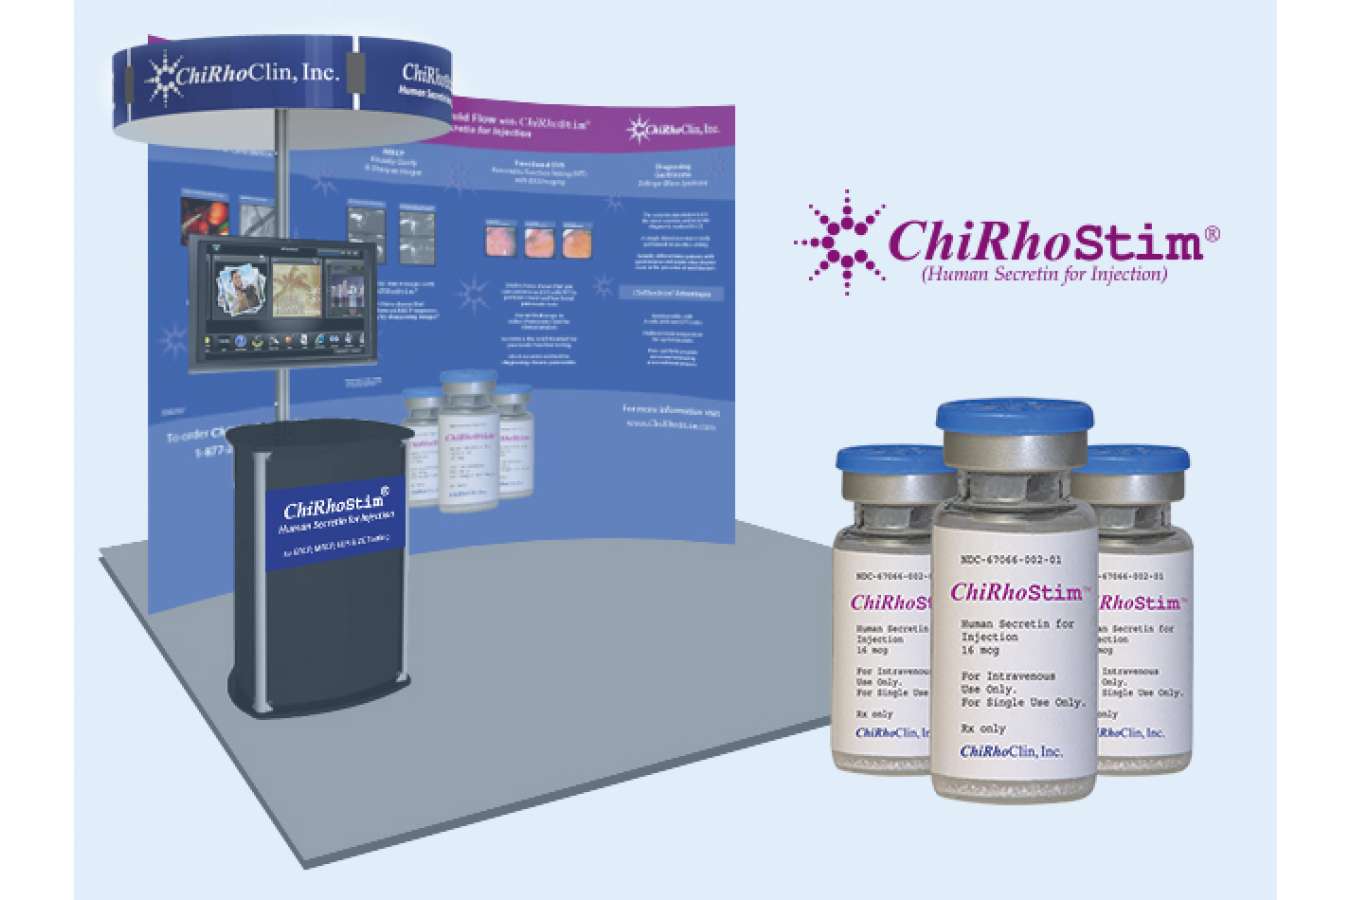 Kiosk & Bottles : 10' display booth with monitor kiosk and header